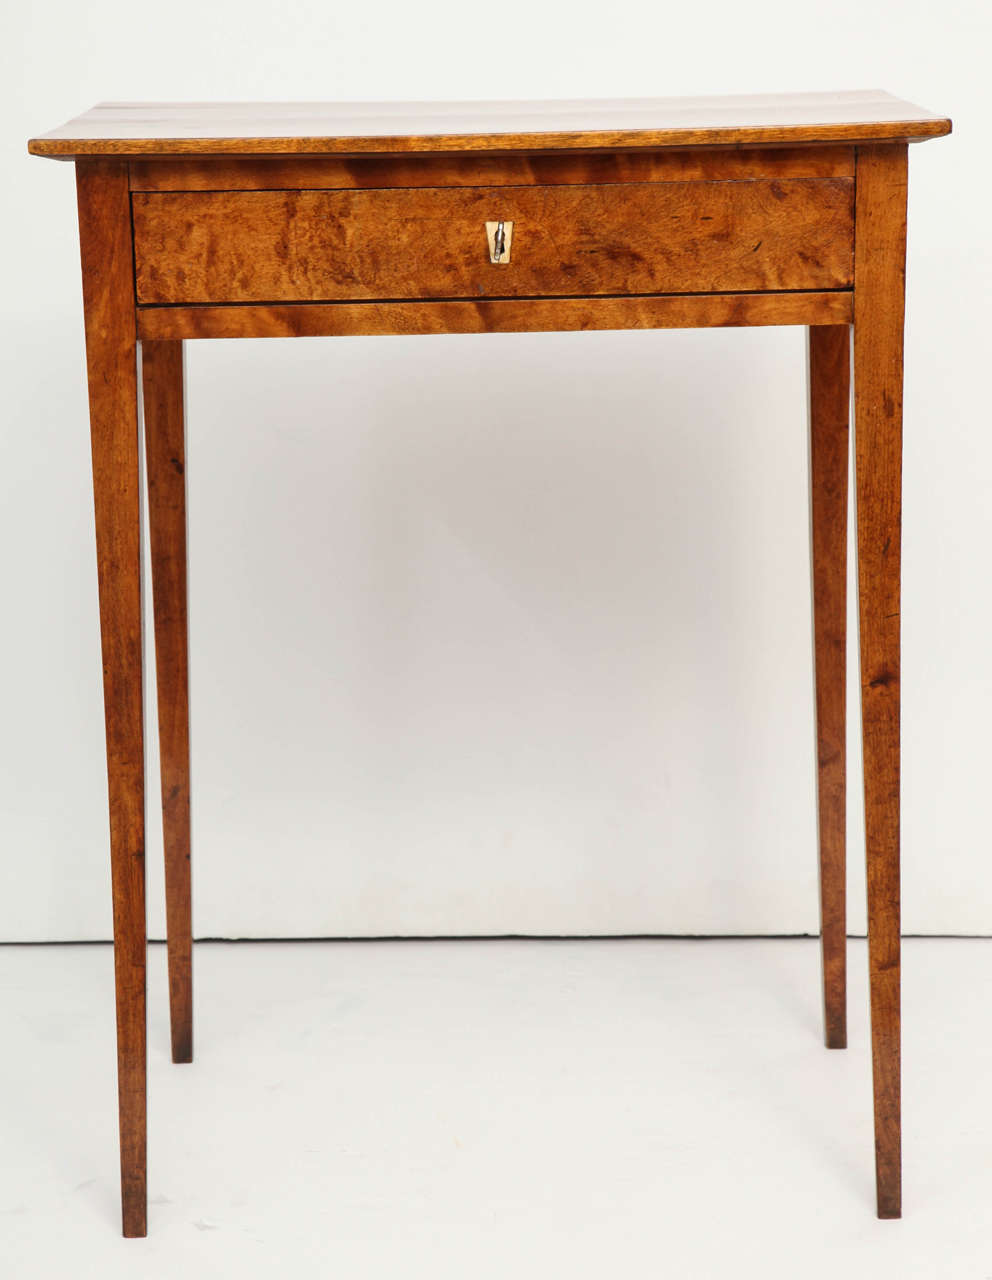 A Swedish Late Gustavian alrot side table, Circa 1810-1820, with a rectangular top above a single frieze drawer raised on square tapered legs.